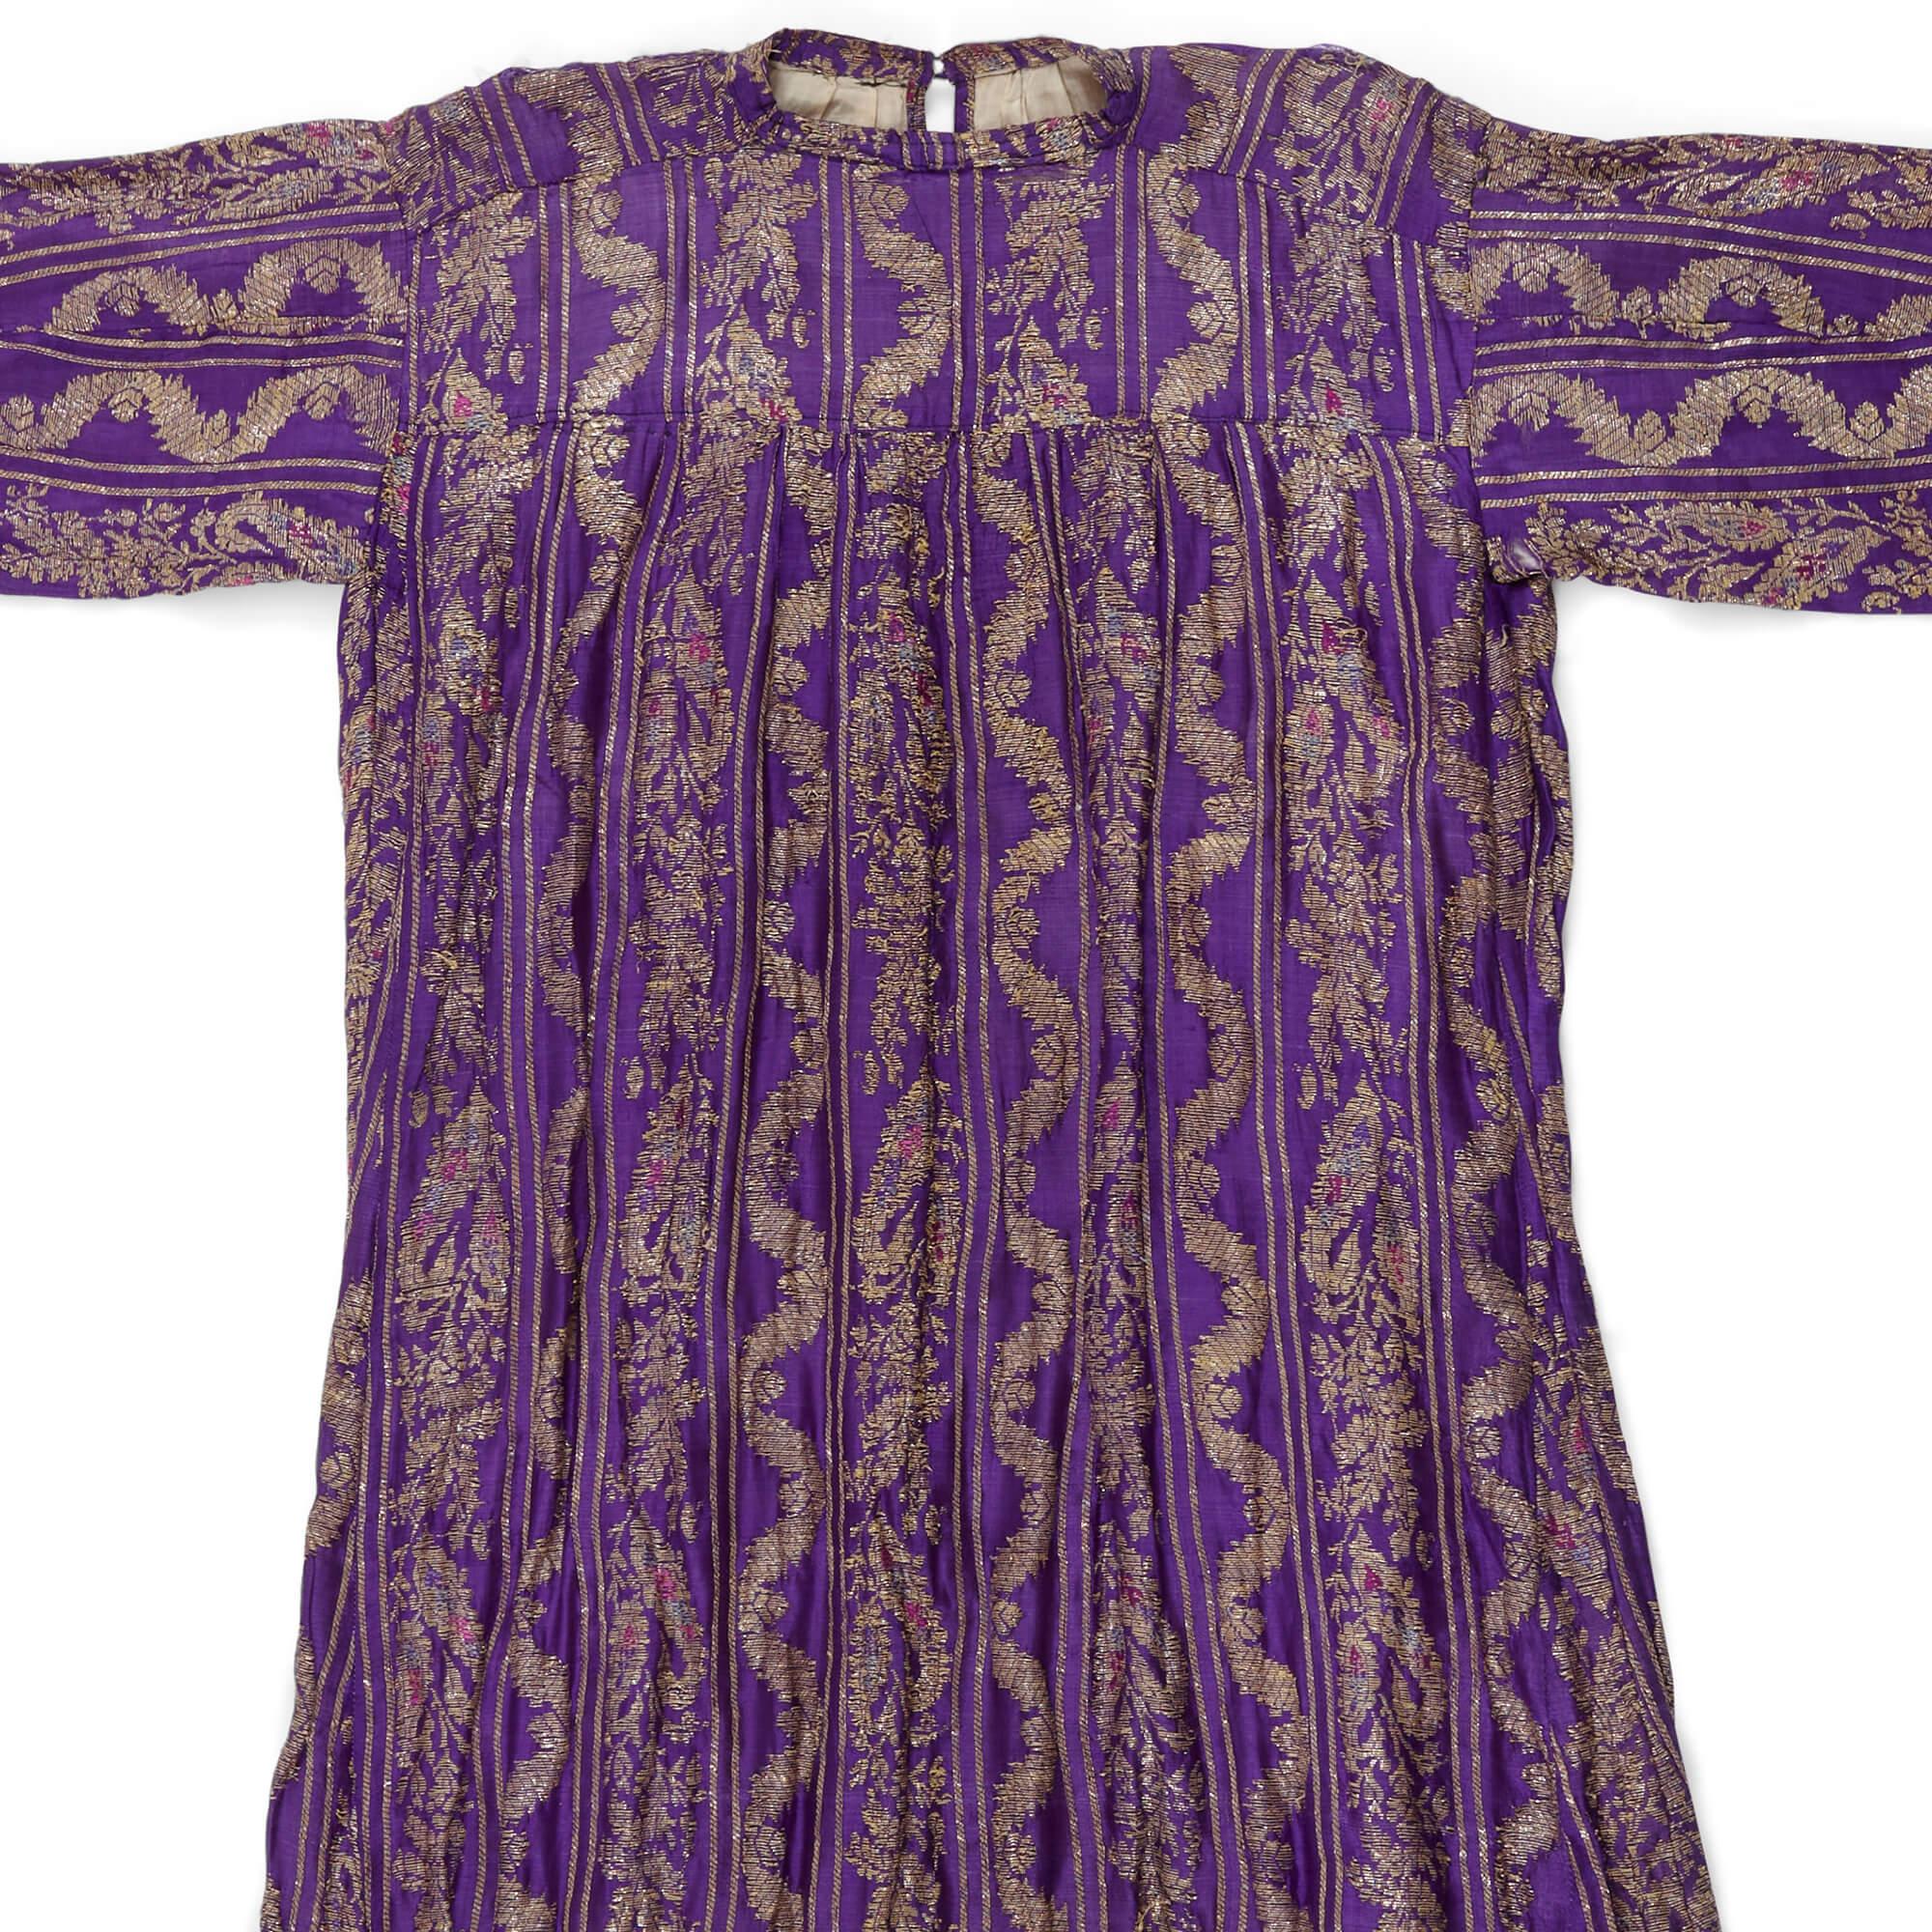 19th Century Turkish Ottoman Period Embroidered Caftan In Good Condition For Sale In London, GB